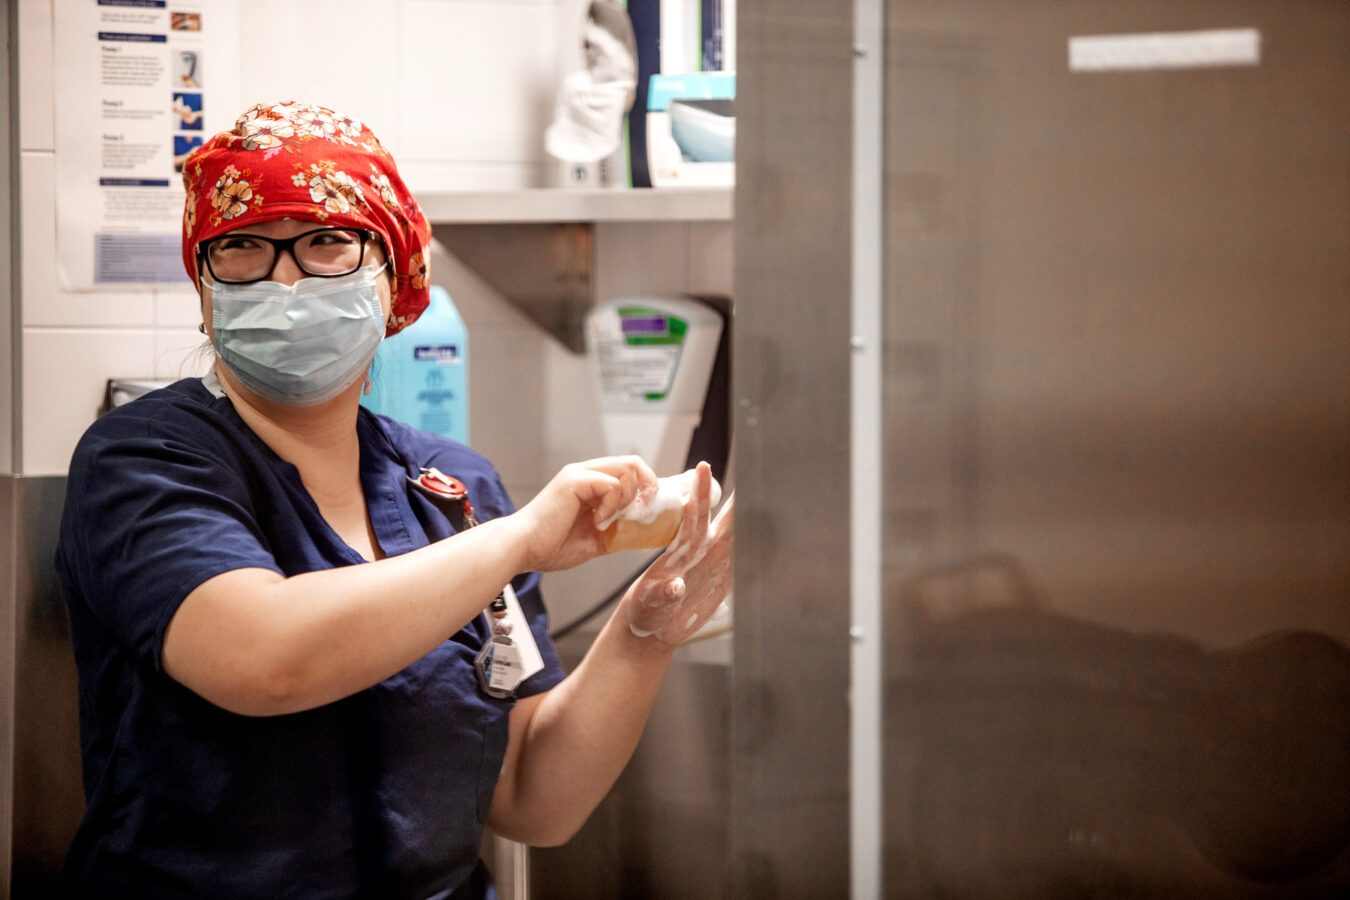 A health care worker stands at a sink, scrubbing their hands with soap. They wear a floral bandanna over their hair, black rimmed glasses, and a face mask. They have light-toned skin and blue scrubs.